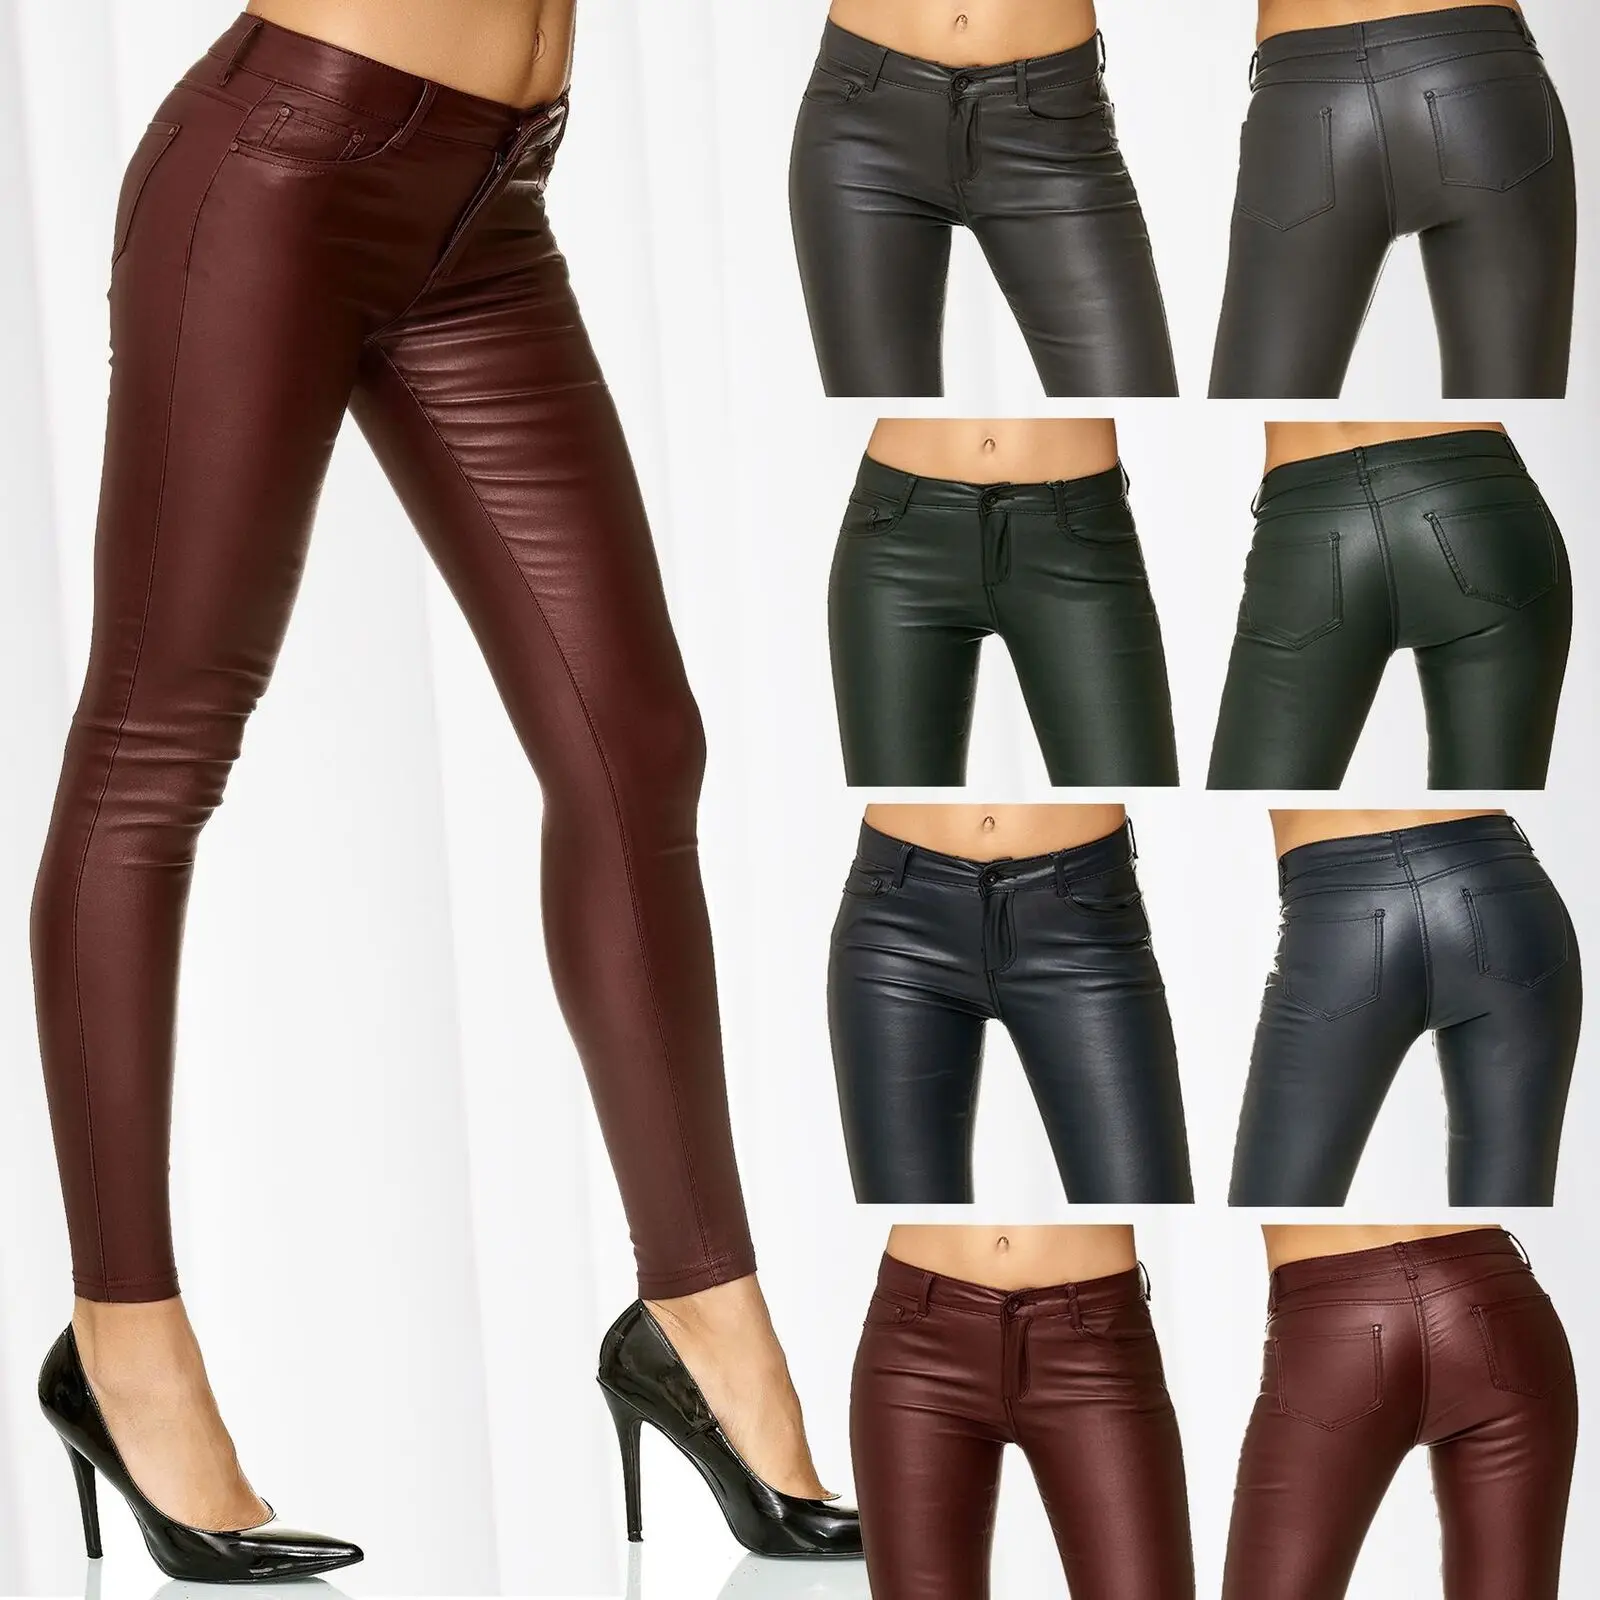 

ZOGAA 202 new Pants Women PU Leather Pant Skinny Sexy Trousers Solid Pencil Pants Ladies Pants Biker Art Leather Trousers